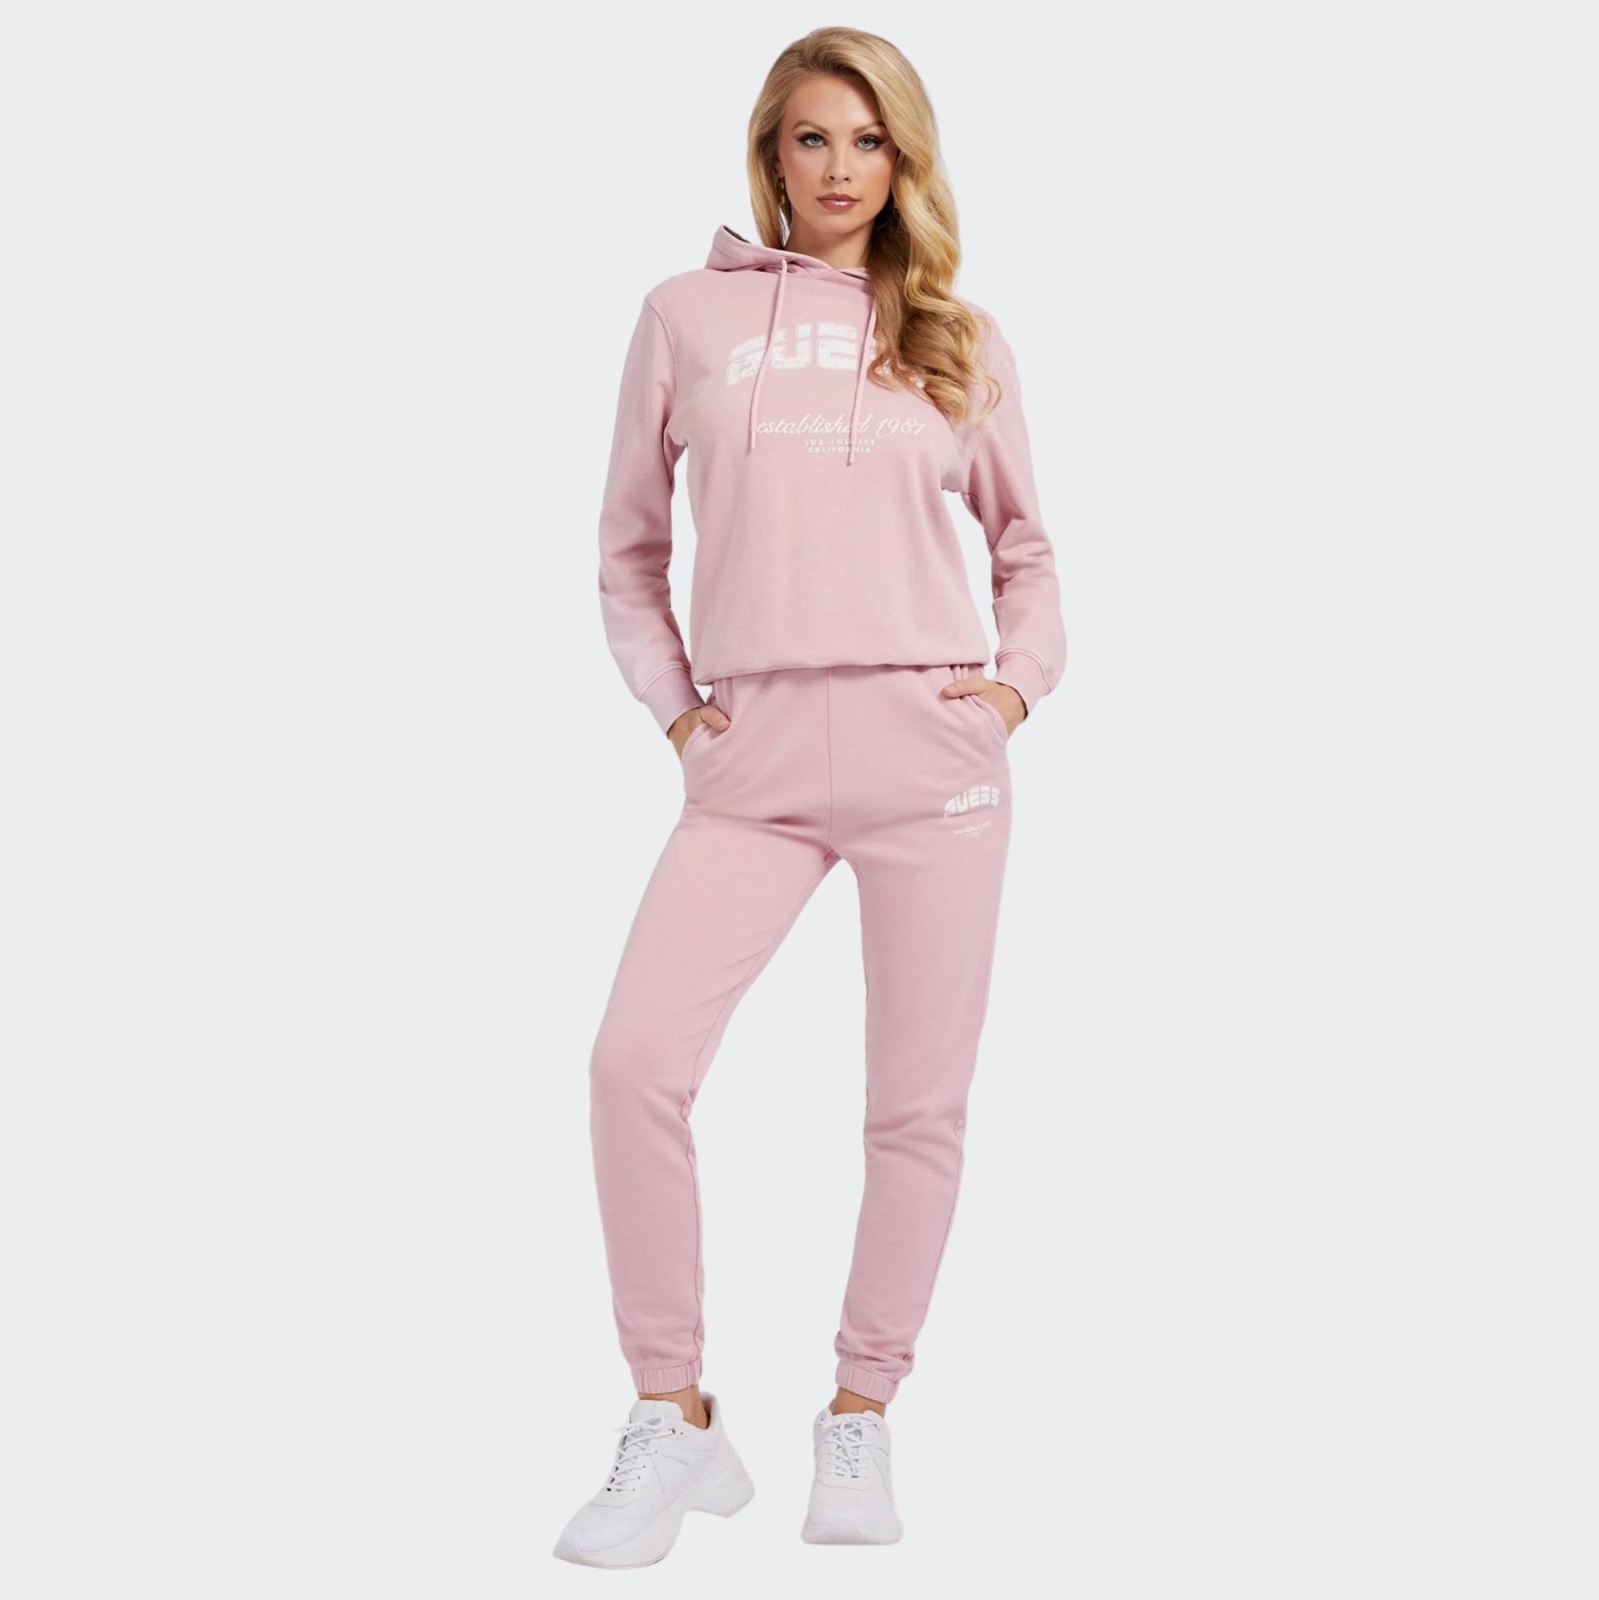 GUESS BRYONY WOMEN'S JOGGER